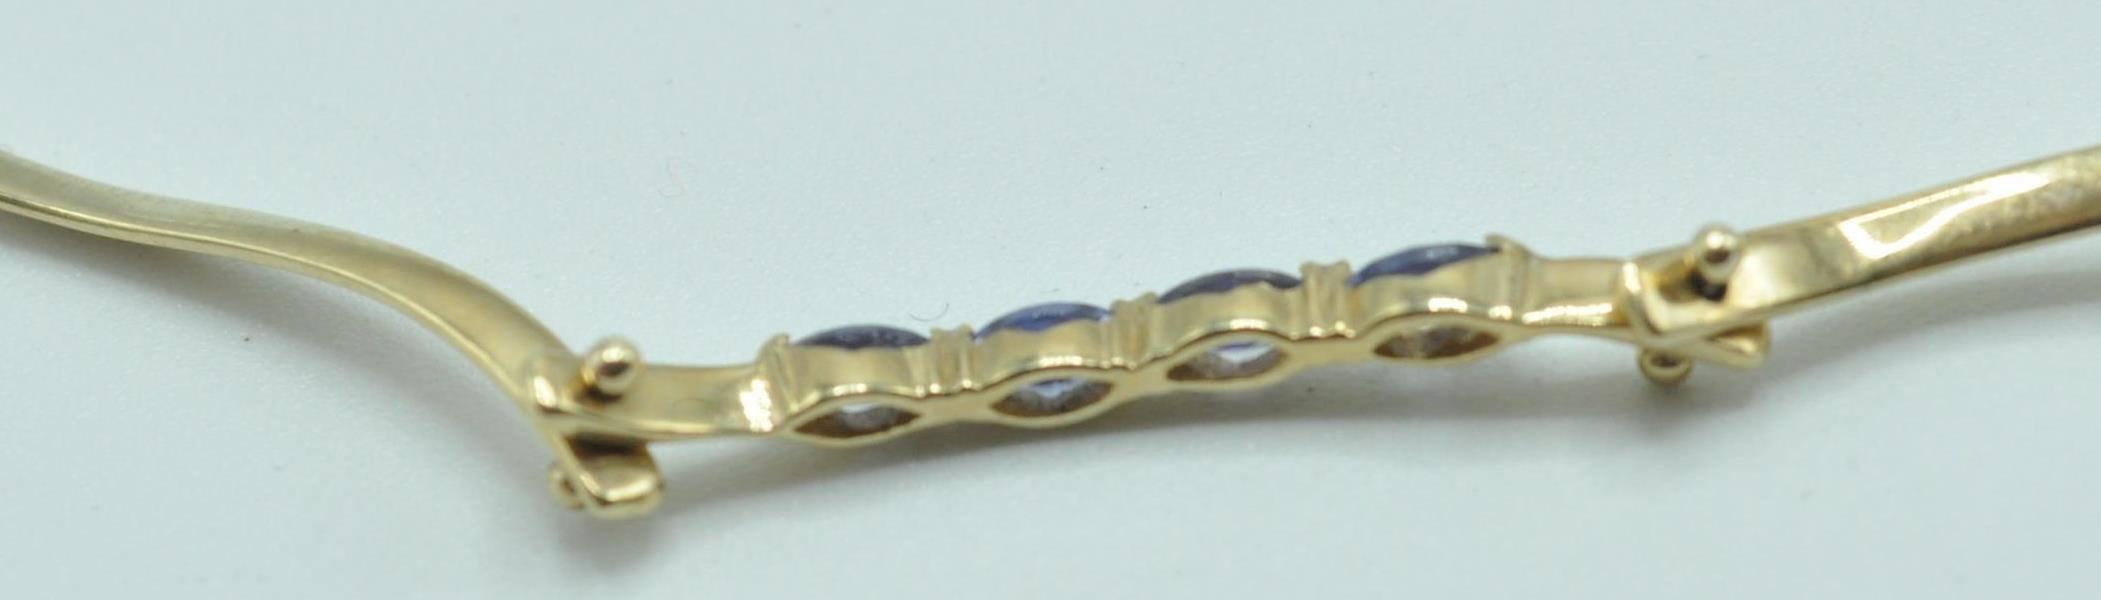 9CT GOLD AND BLUE STONE SPACER BRACELET - Image 3 of 6